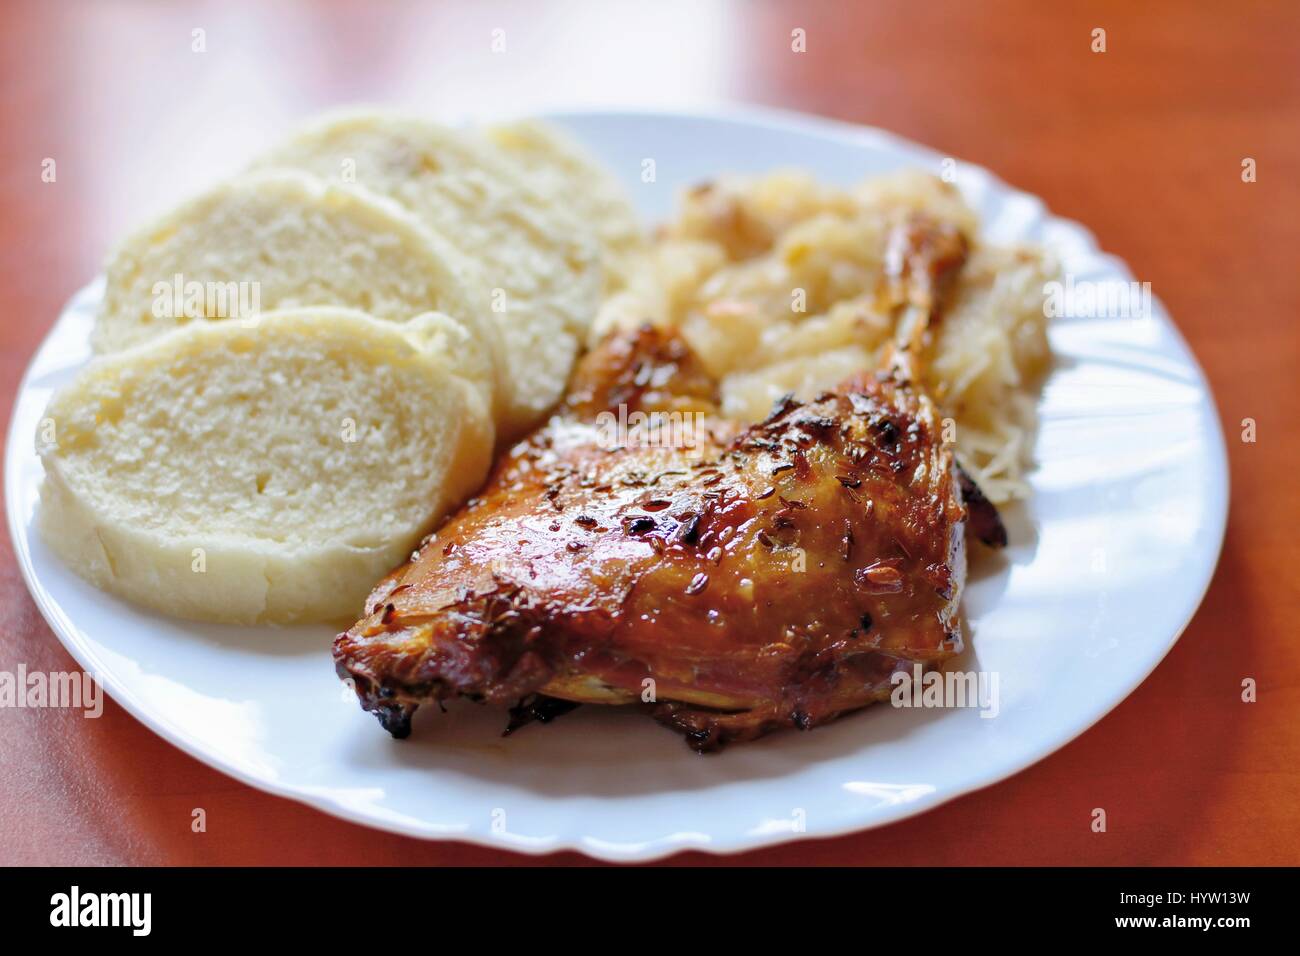 A Plate of Roast Duck Drumstick with Dumplings and Stewed White Cabbage. Stock Photo